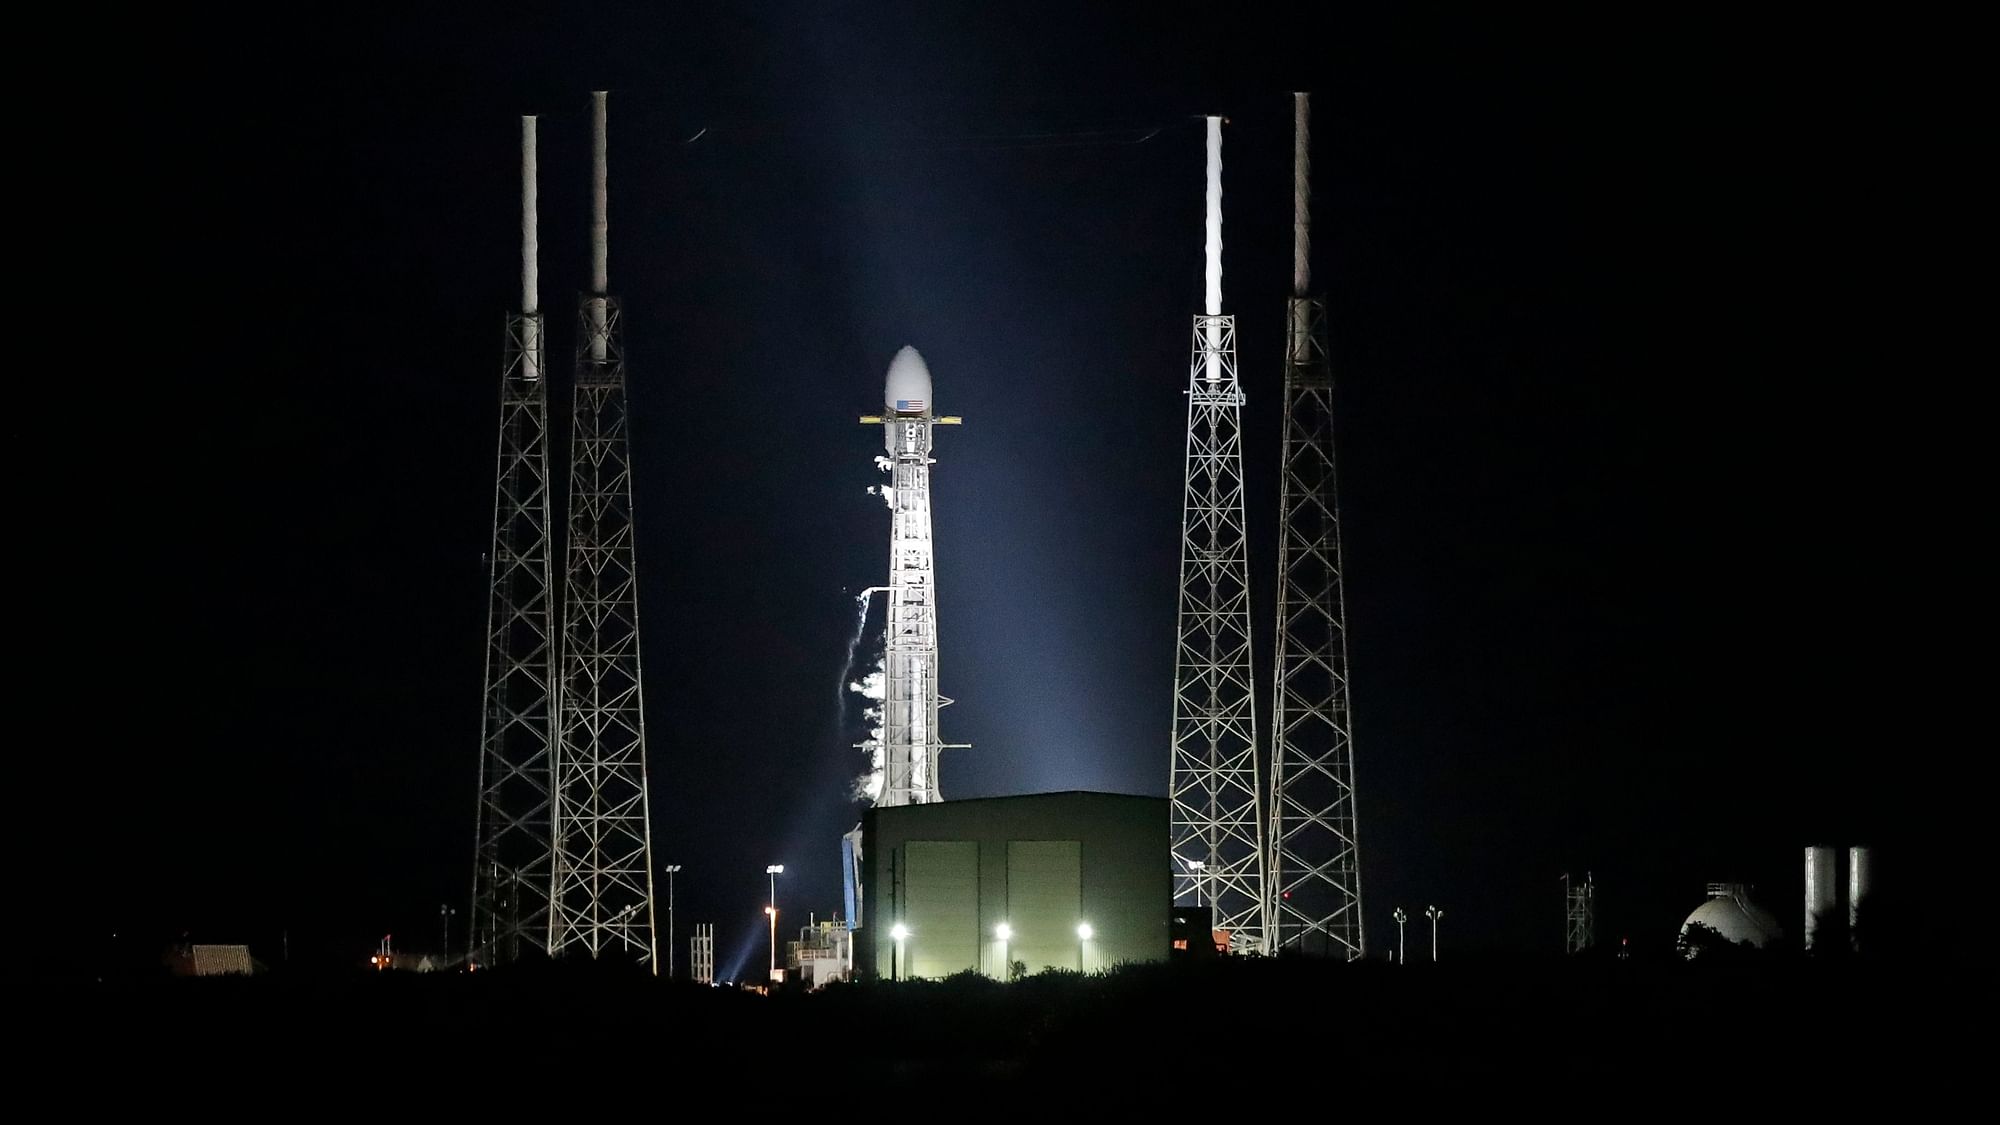 The SpaceX Falcon 9 ready to launch 60 satellites into the lower Earth Orbit.